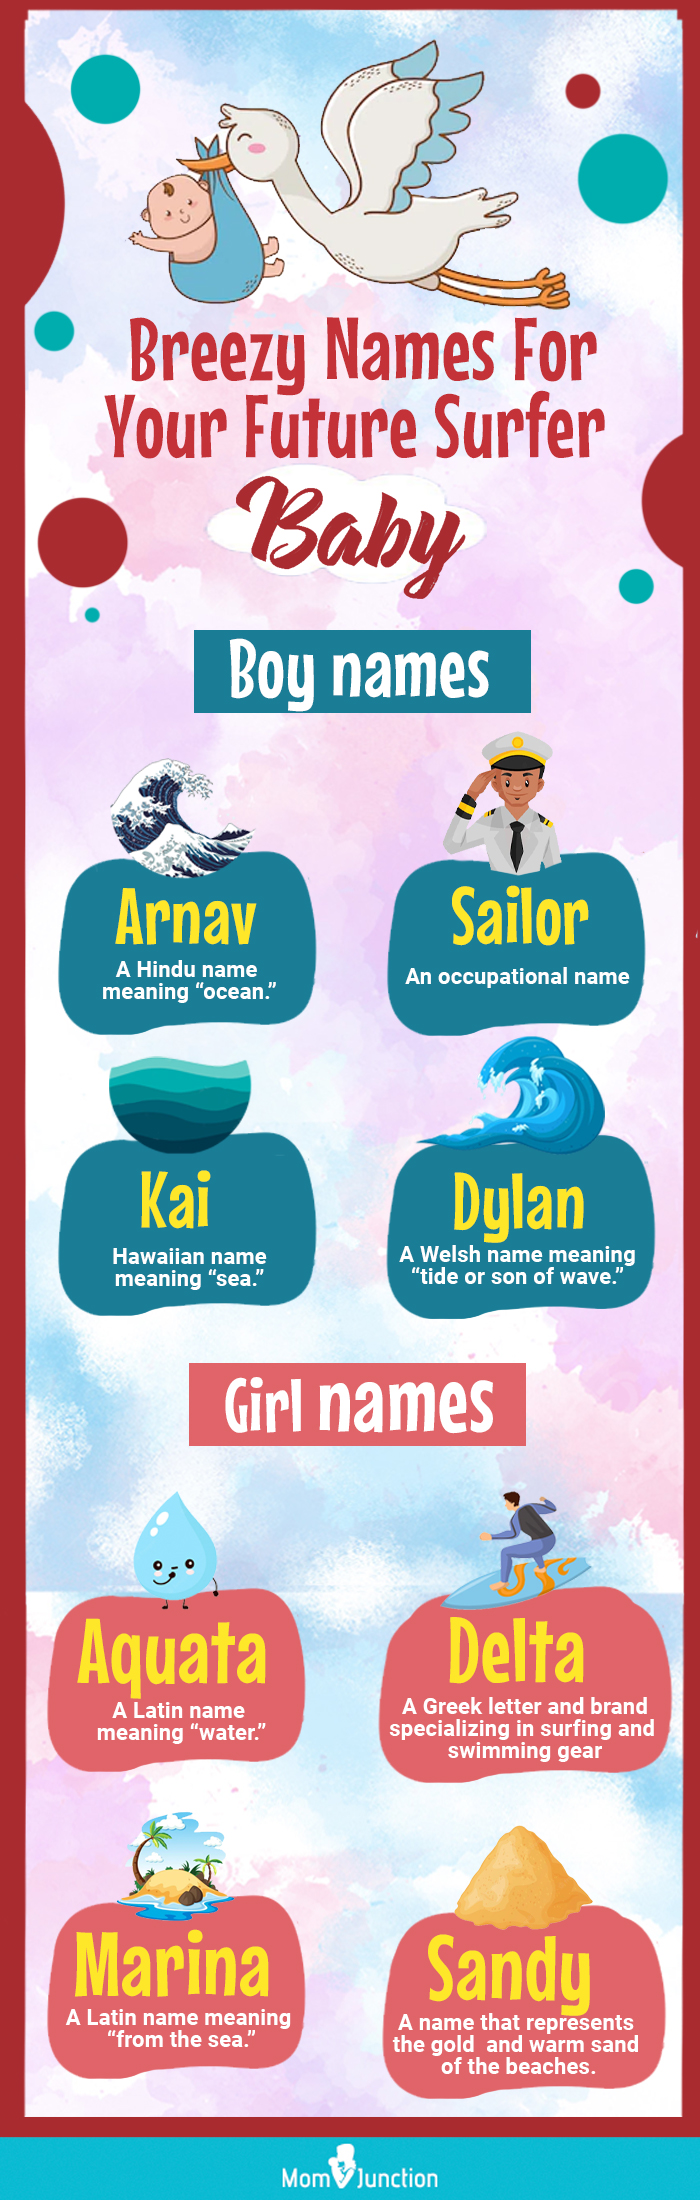 breezy names for your future surfer baby [infographic]